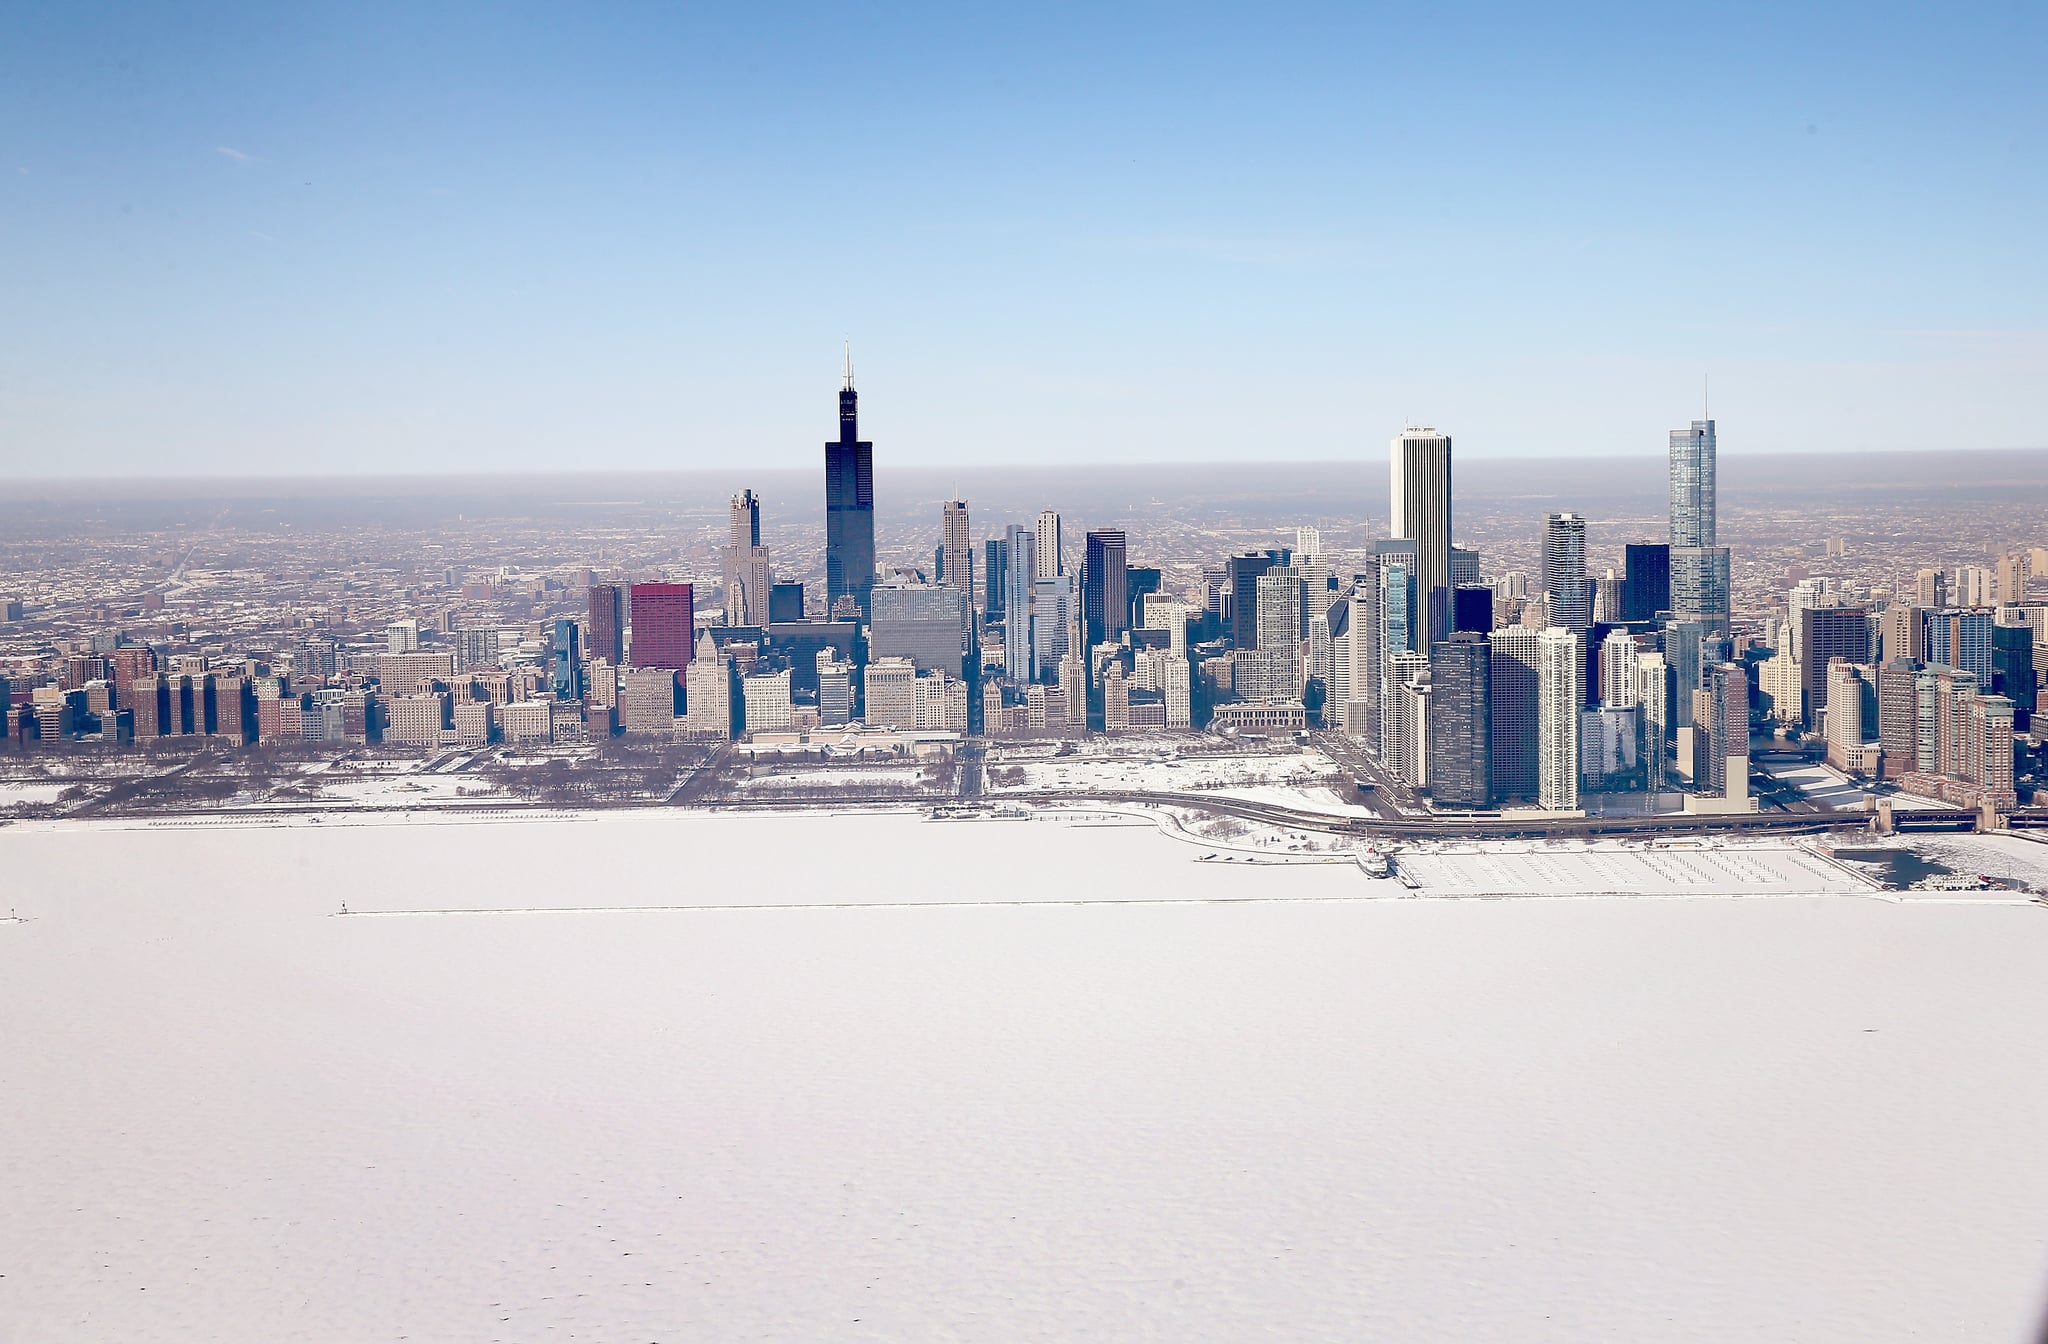 chicago snow totals january 20th